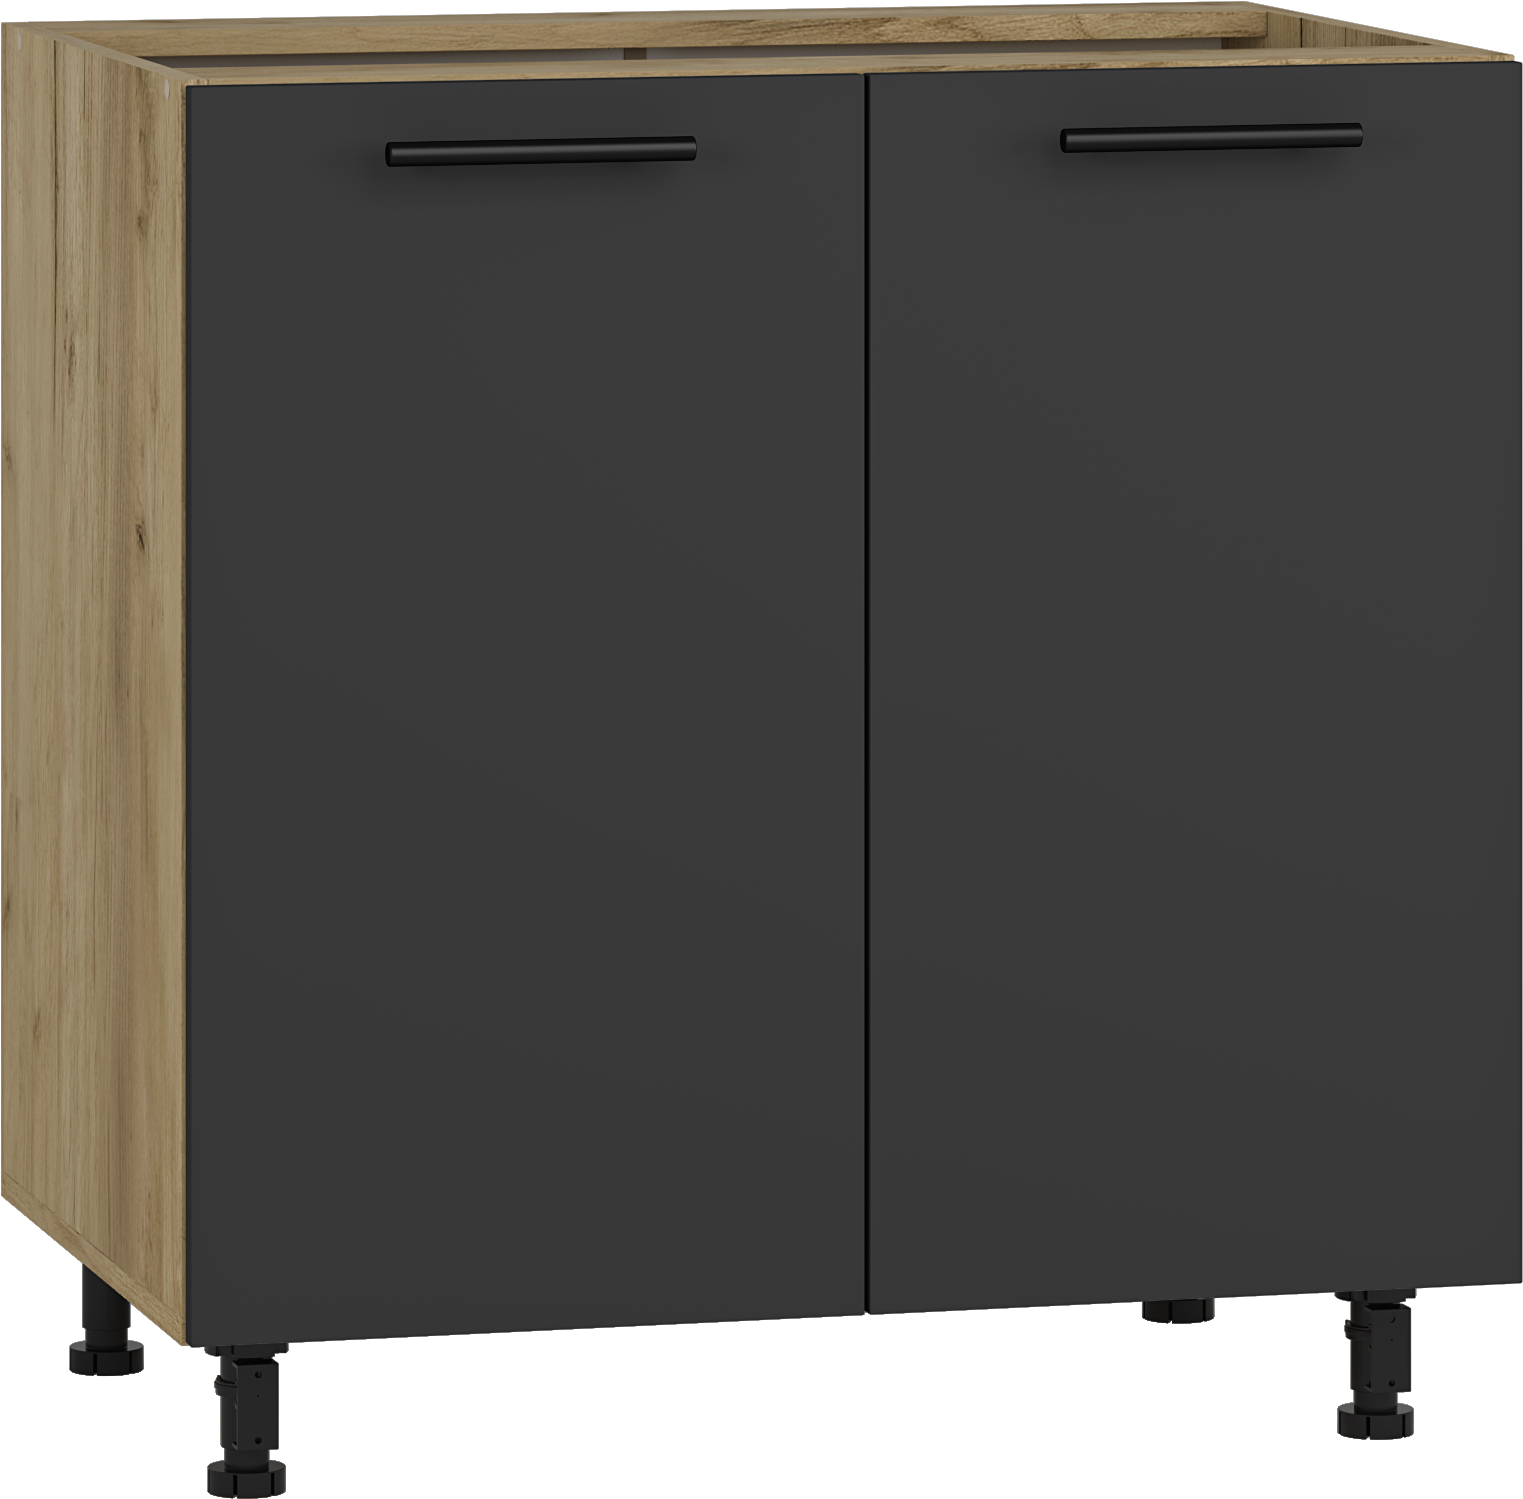 VENTO D-80/82 lower cabinet